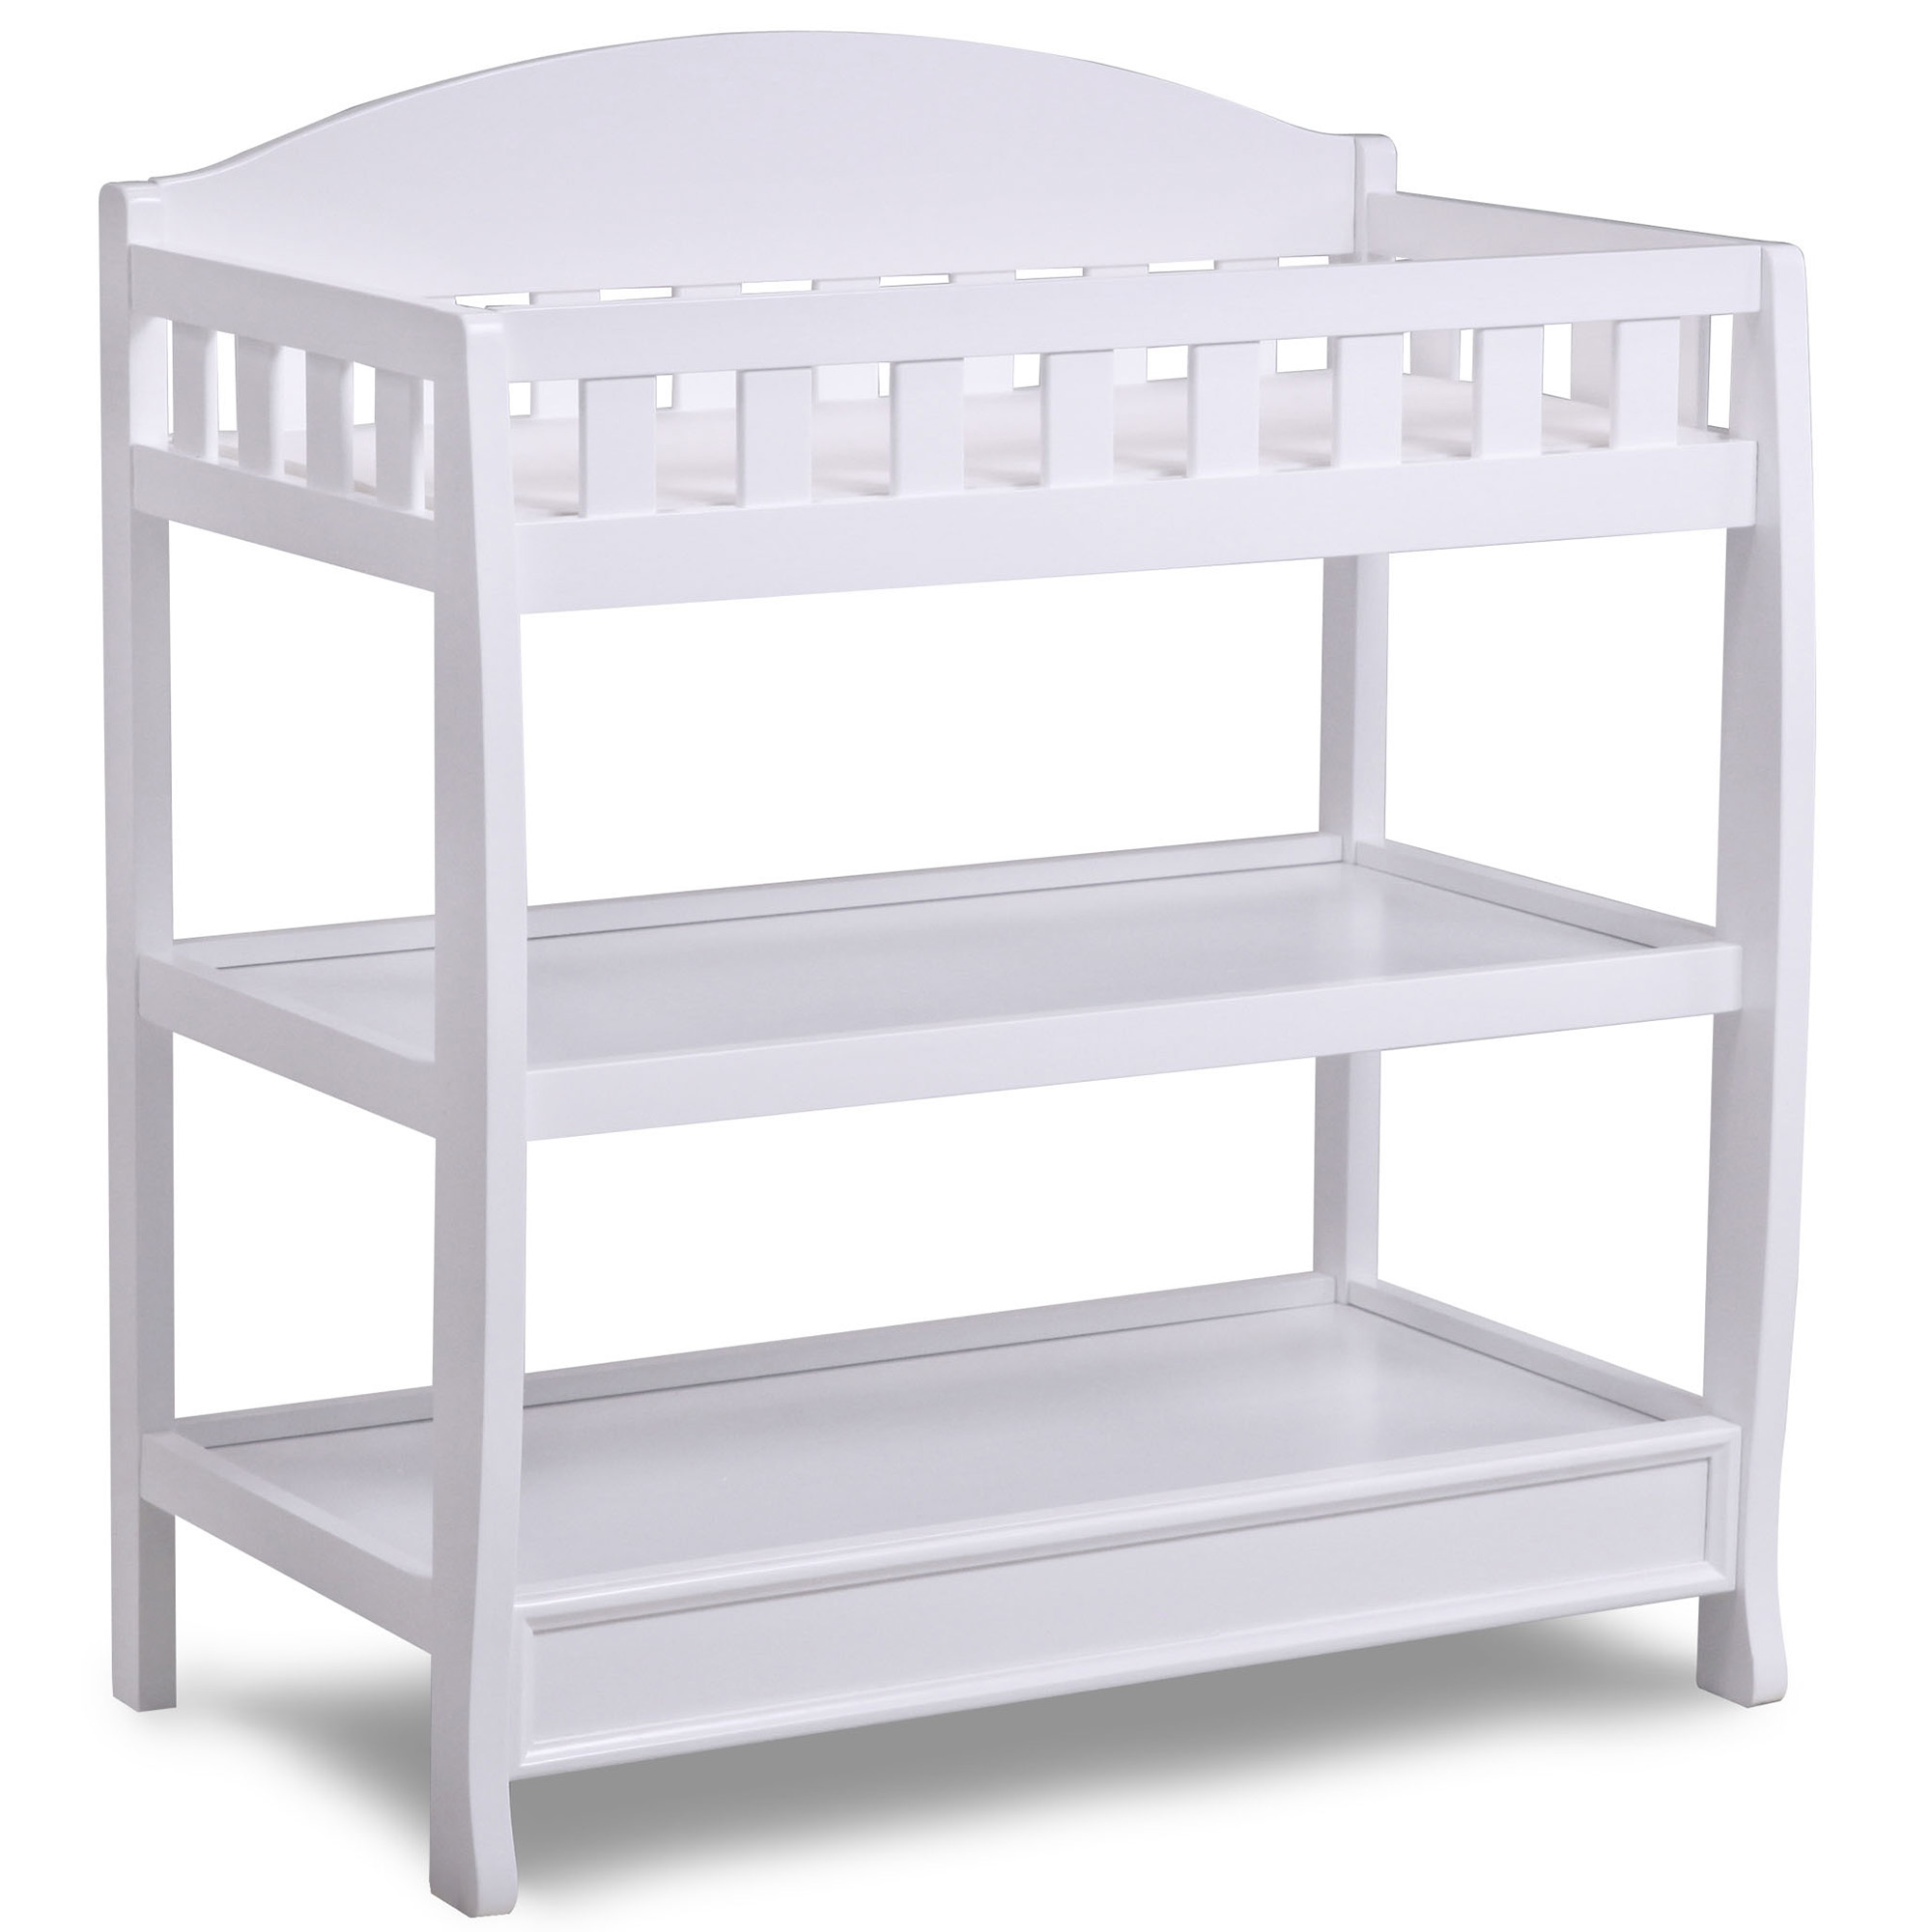 Delta Children Wilmington Wood Changing Table with Pad, White - image 1 of 6